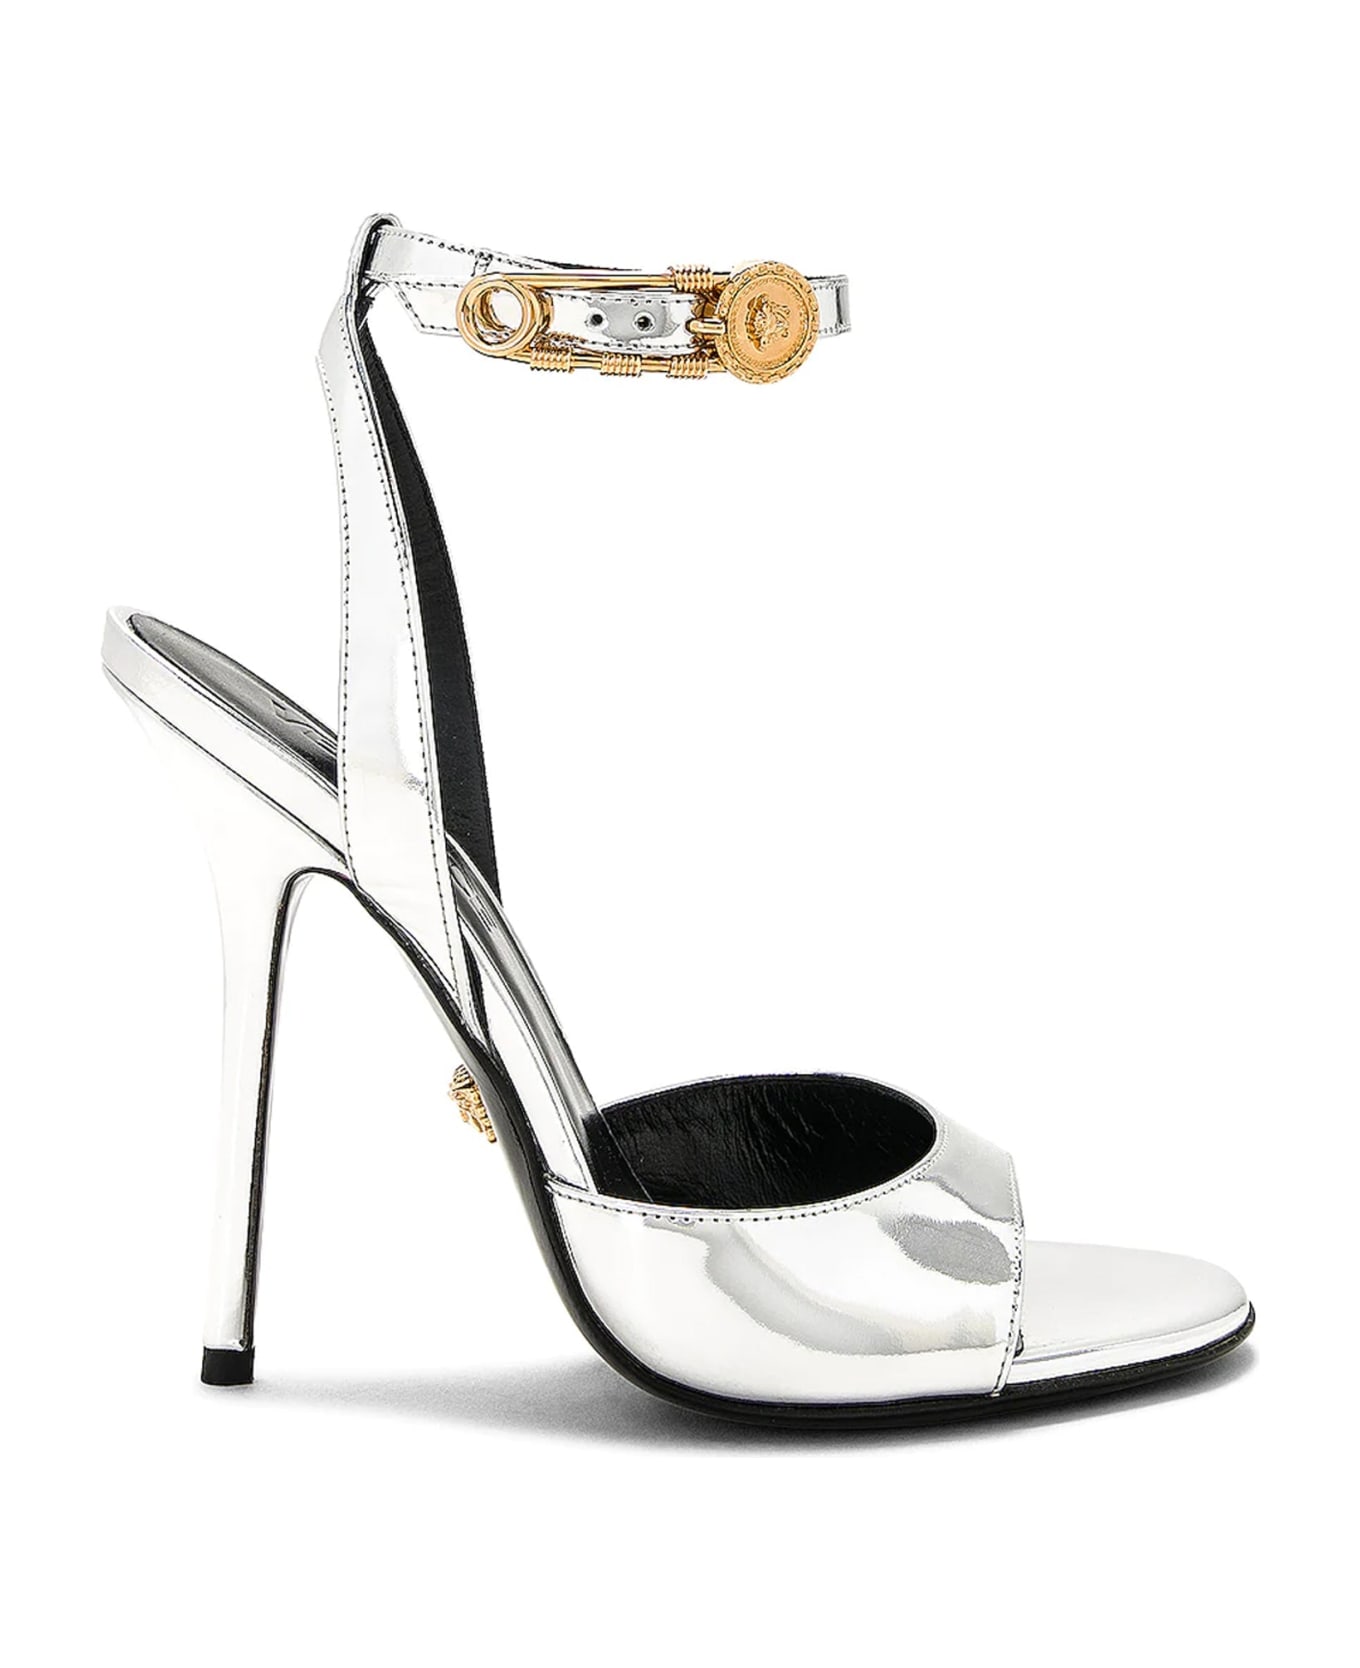 Versace Patent Leather Sandals - Silver